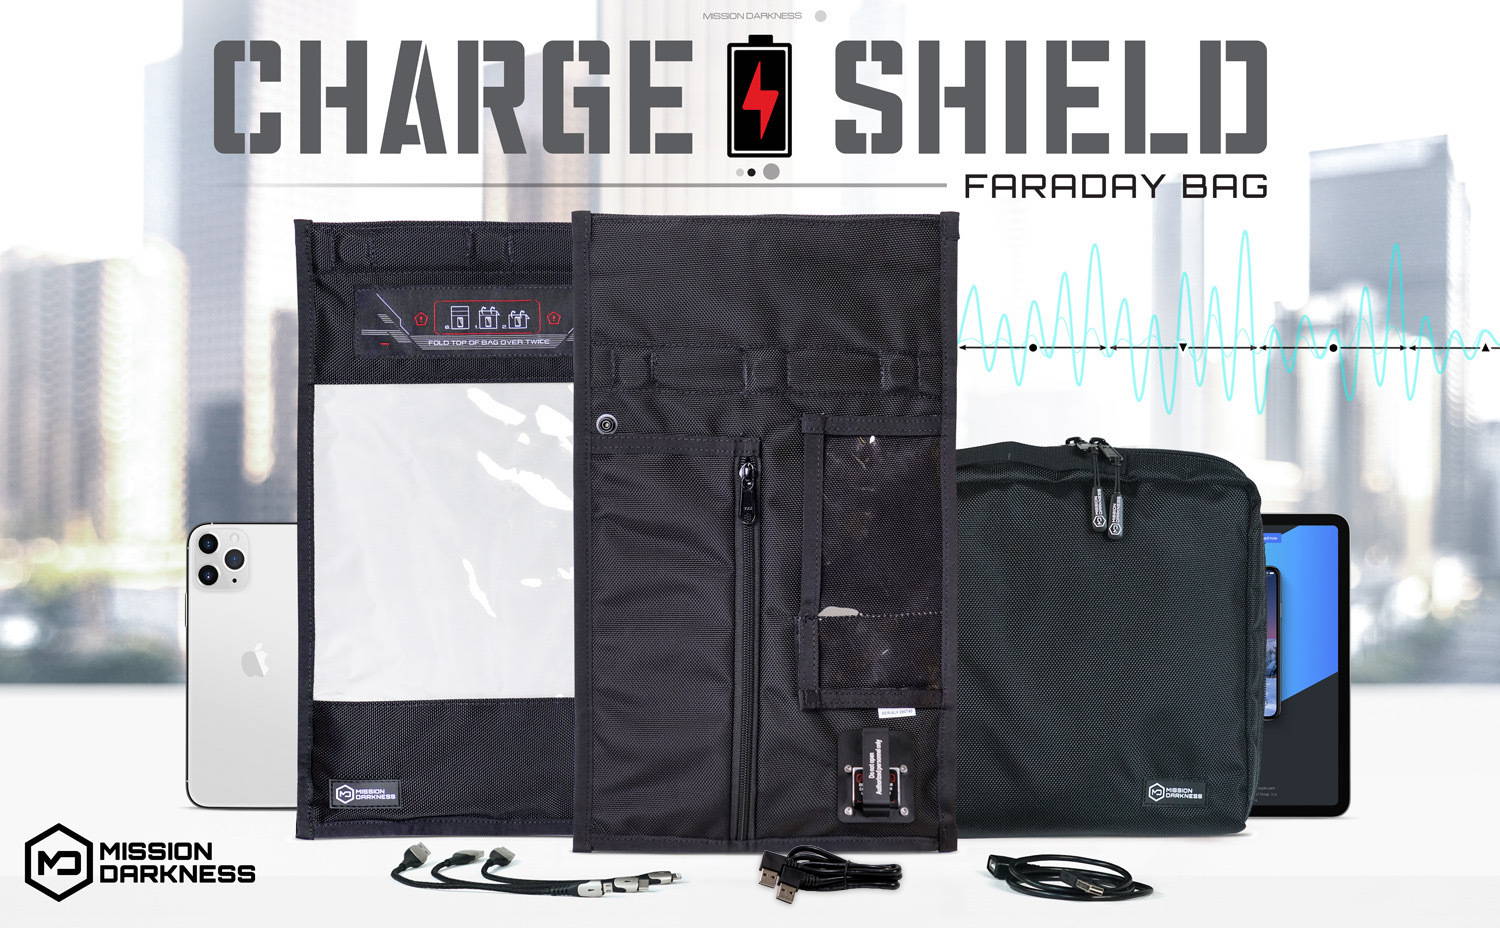 Mission Darkness Window Charge & Shield Faraday Bag Plus Included Accessory Kit